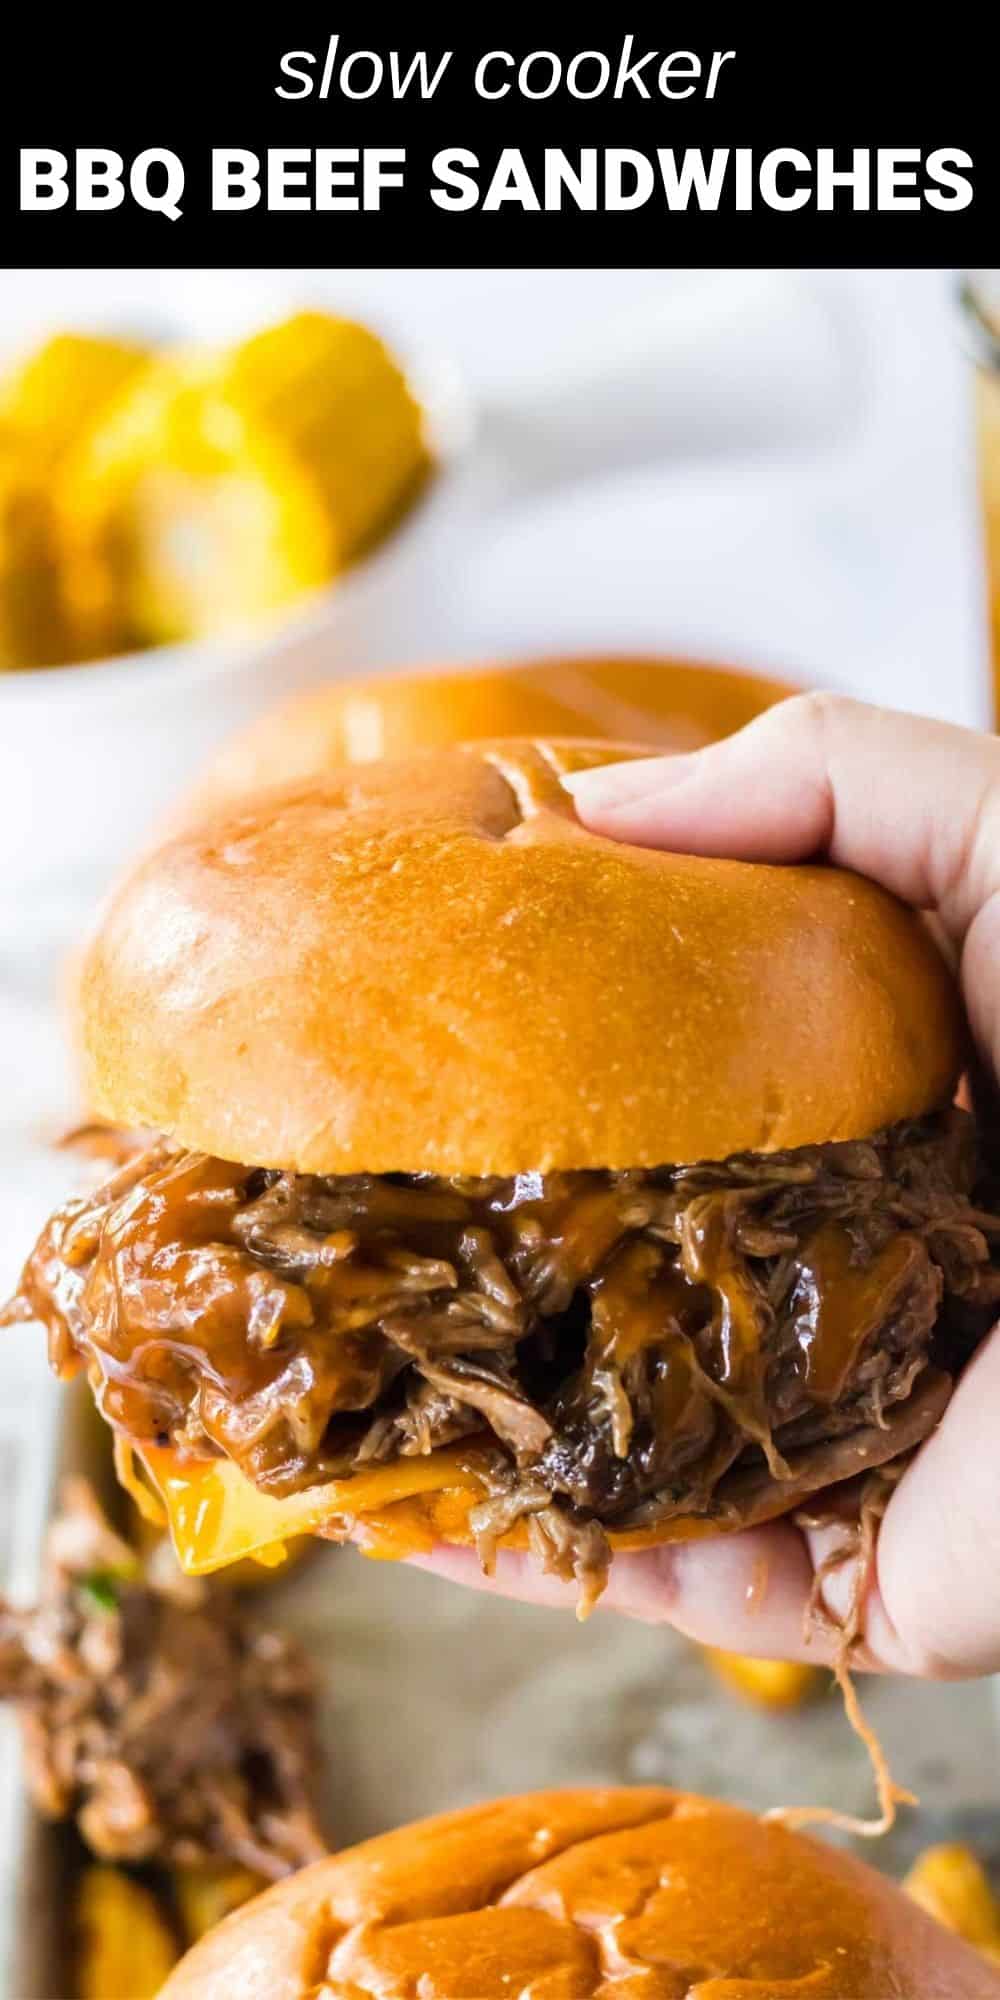 These Slow Cooker BBQ Beef Sandwiches are going to be your new favorite dinner!Tender beef just fallapart in a rich bbq sauce. Pile this high on soft buns and you will have one delicious sandwich.